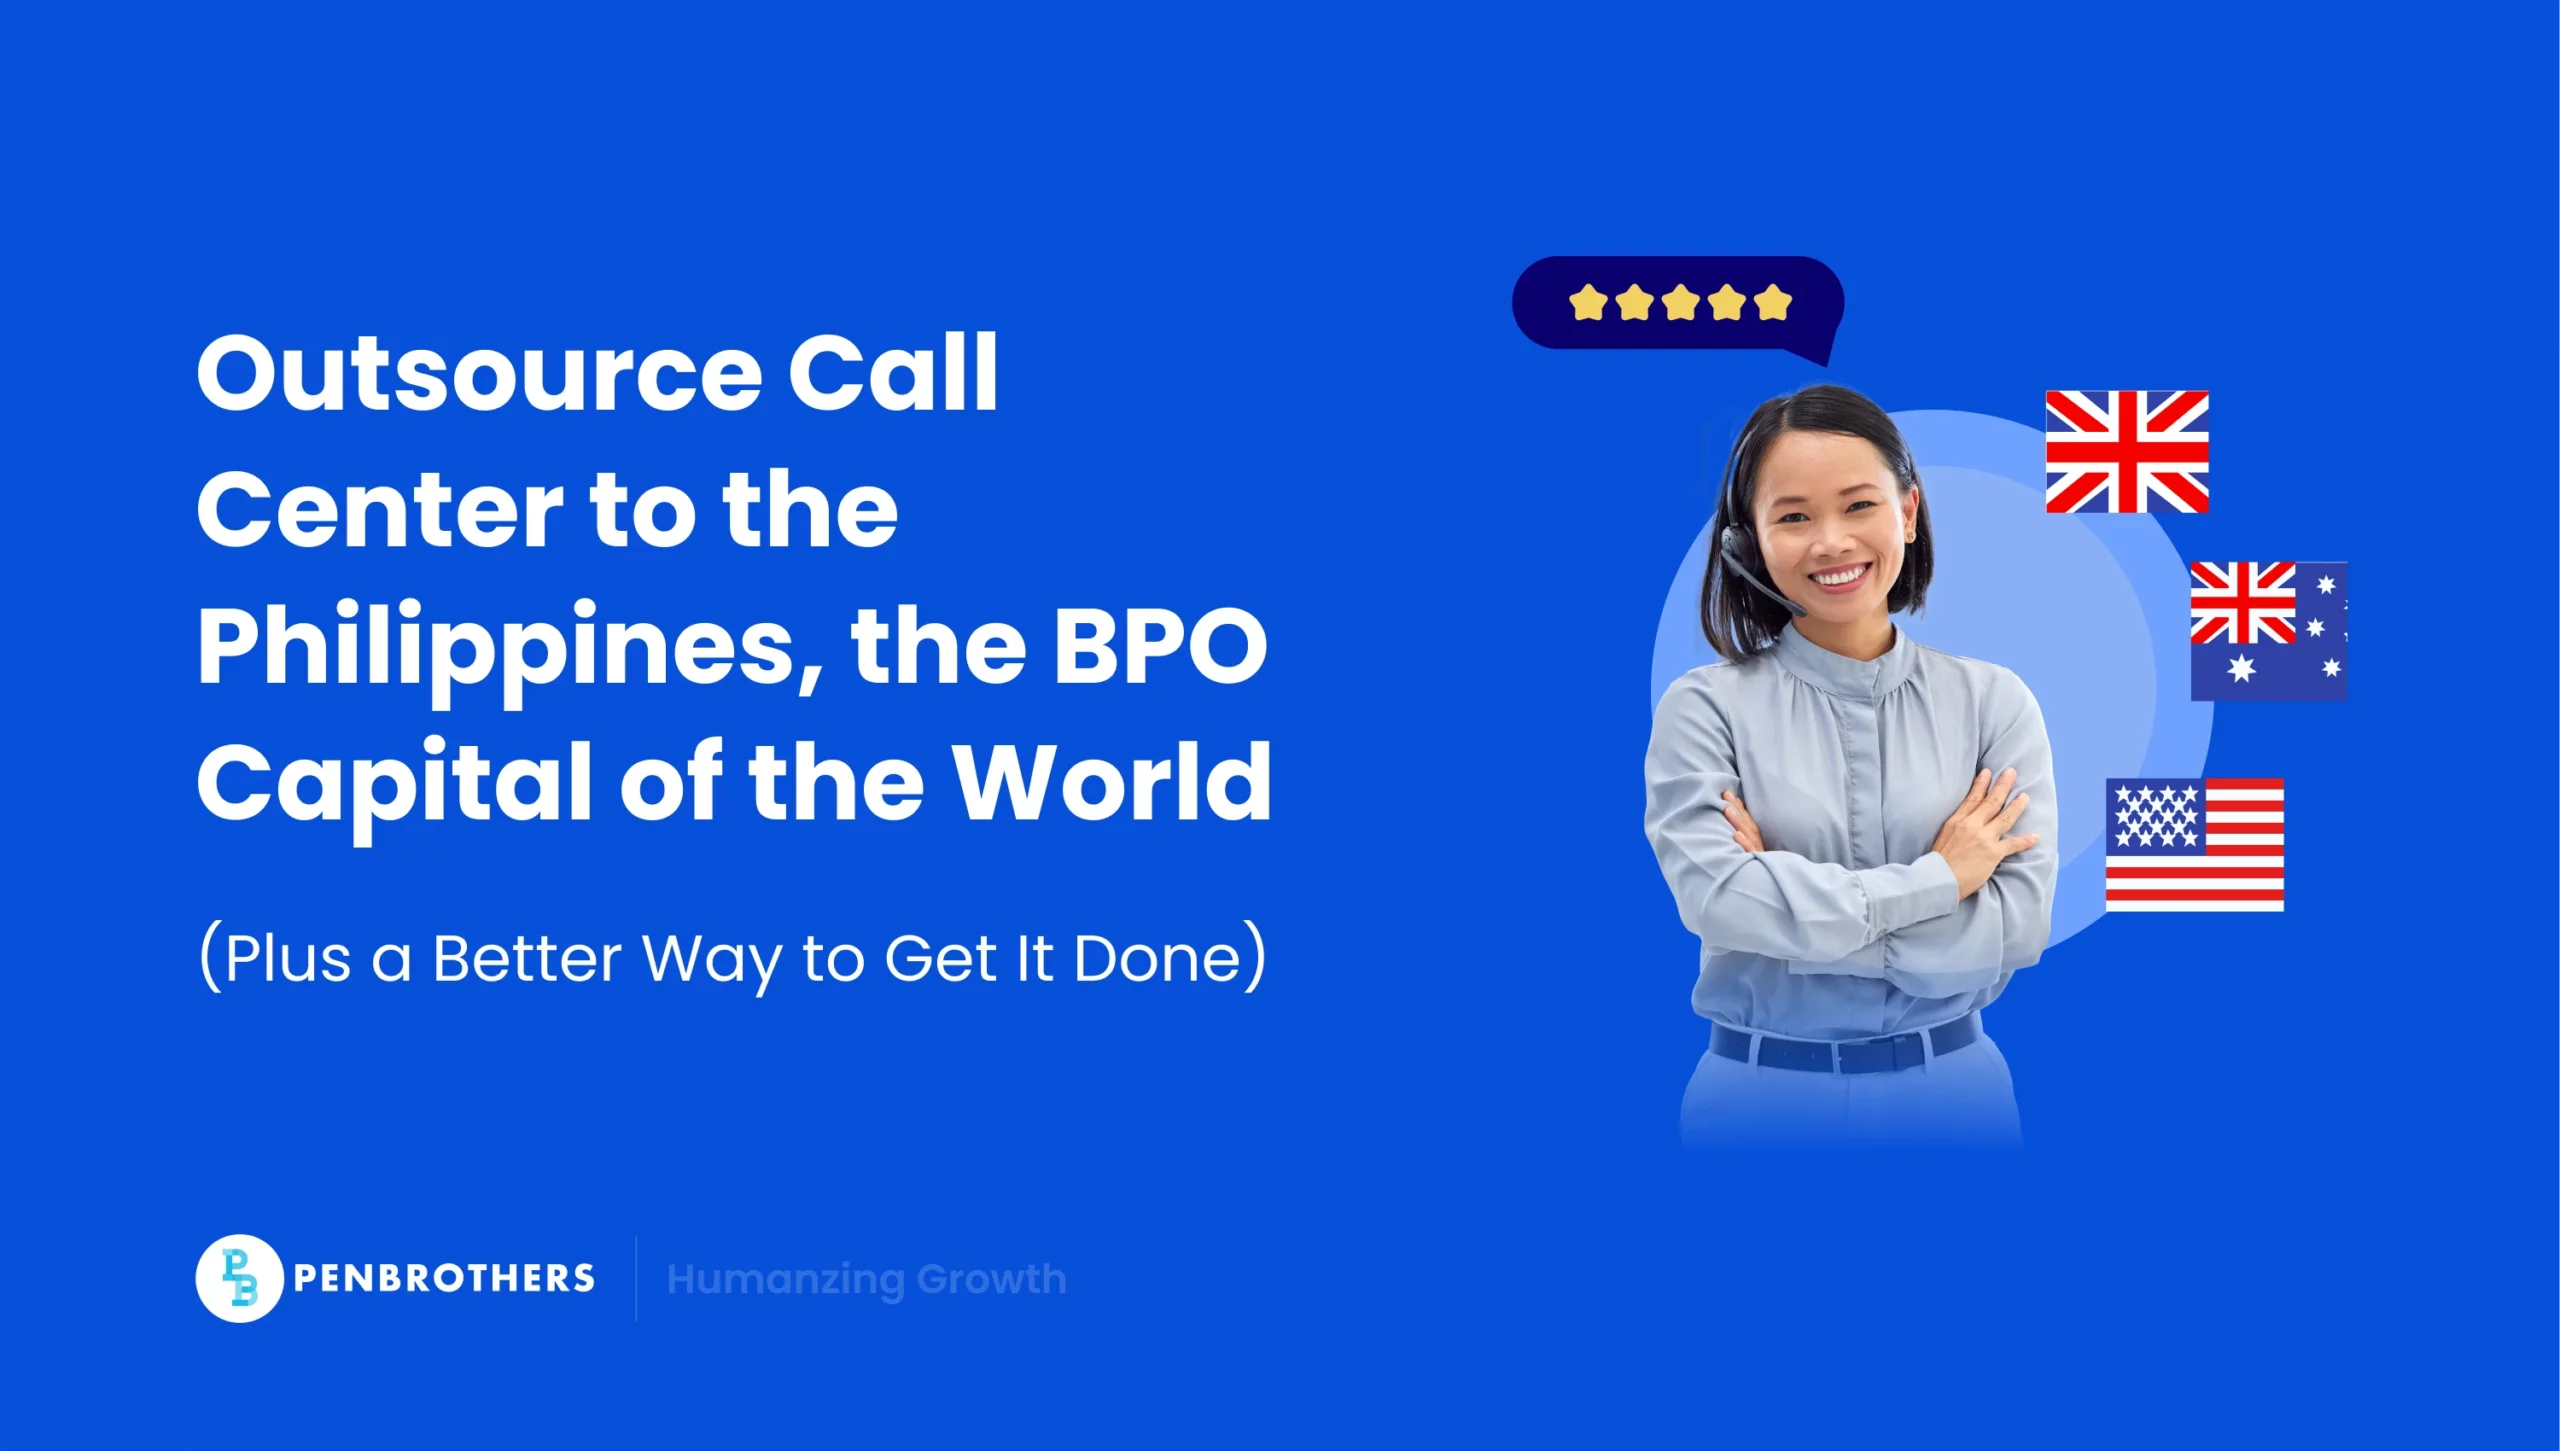 Outsource Call Center to the Philippines, the BPO Capital of the World (Plus a Better Way to Get It Done)